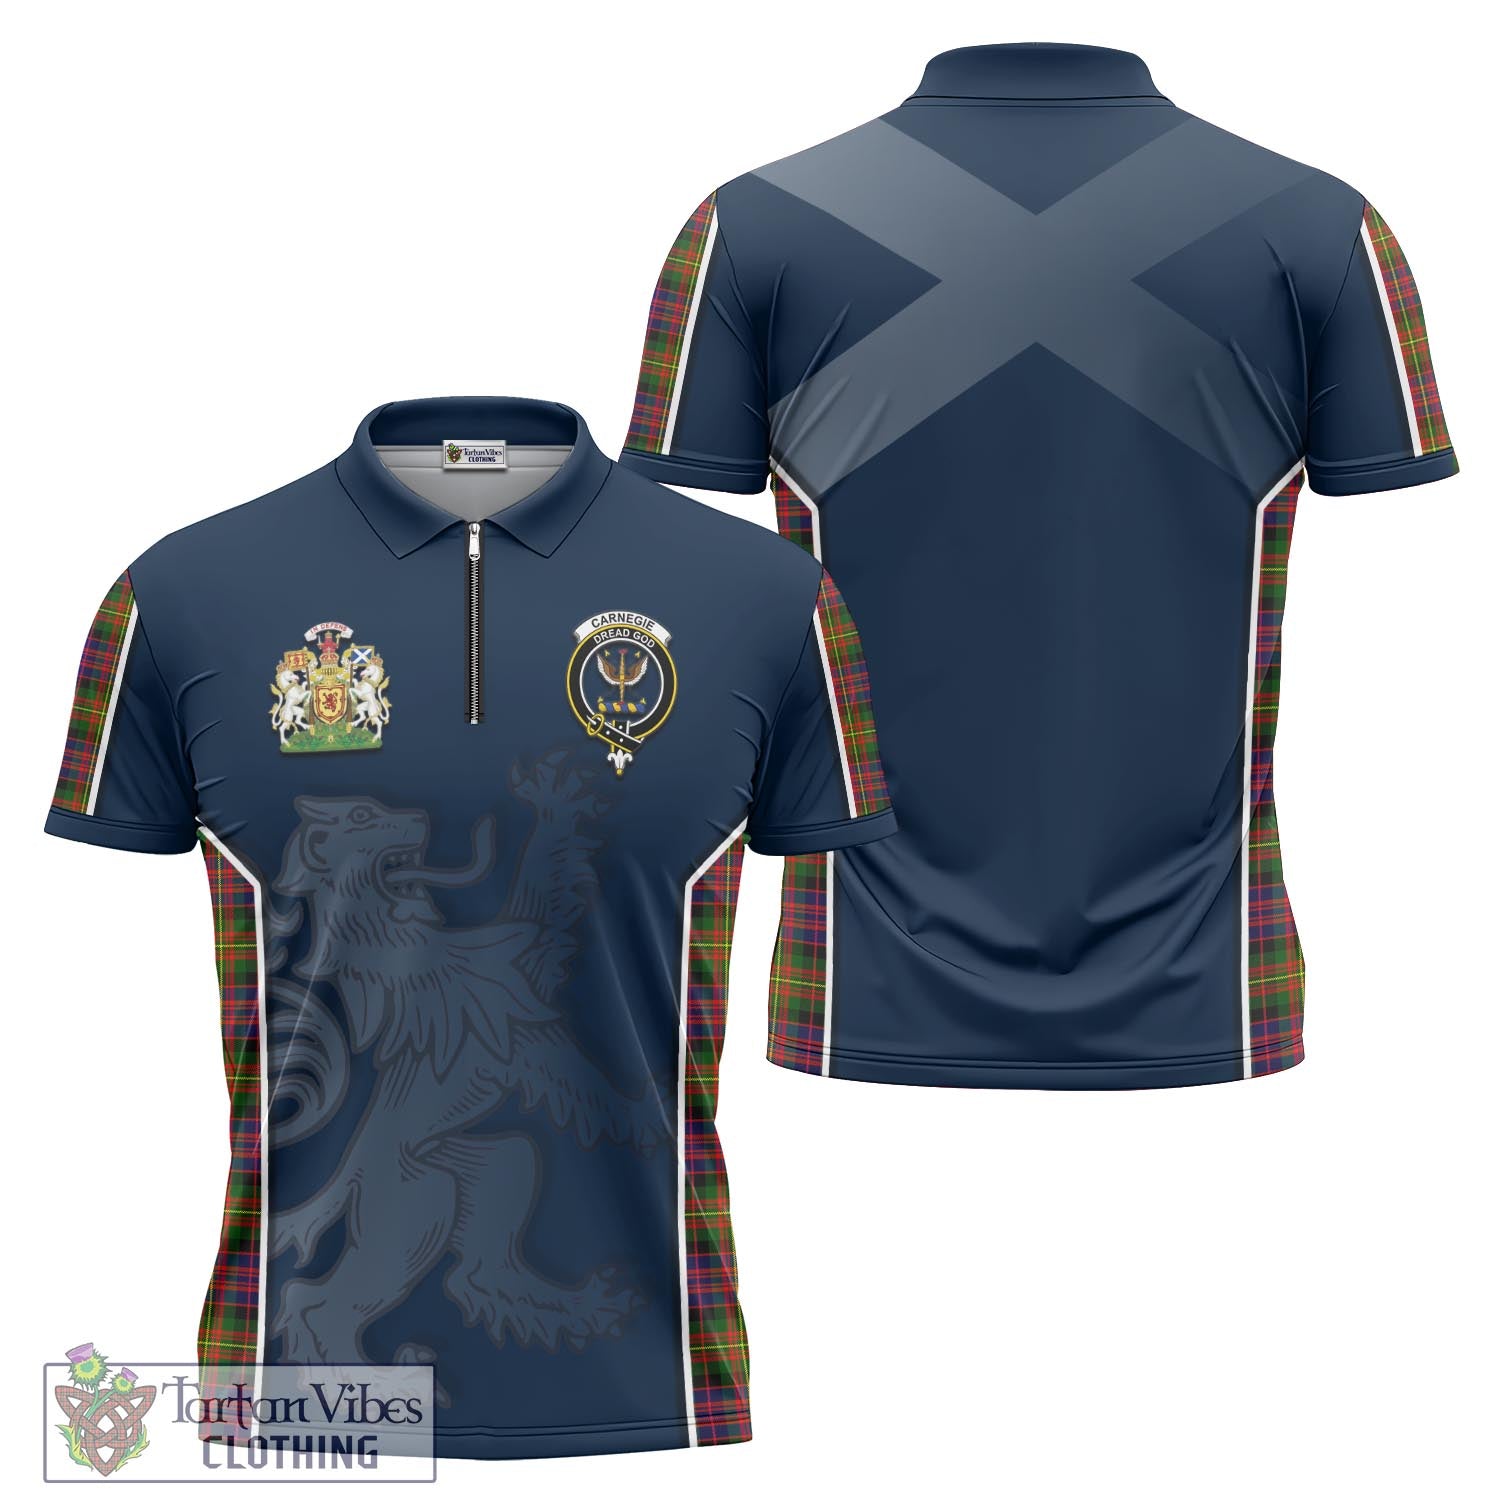 Tartan Vibes Clothing Carnegie Modern Tartan Zipper Polo Shirt with Family Crest and Lion Rampant Vibes Sport Style